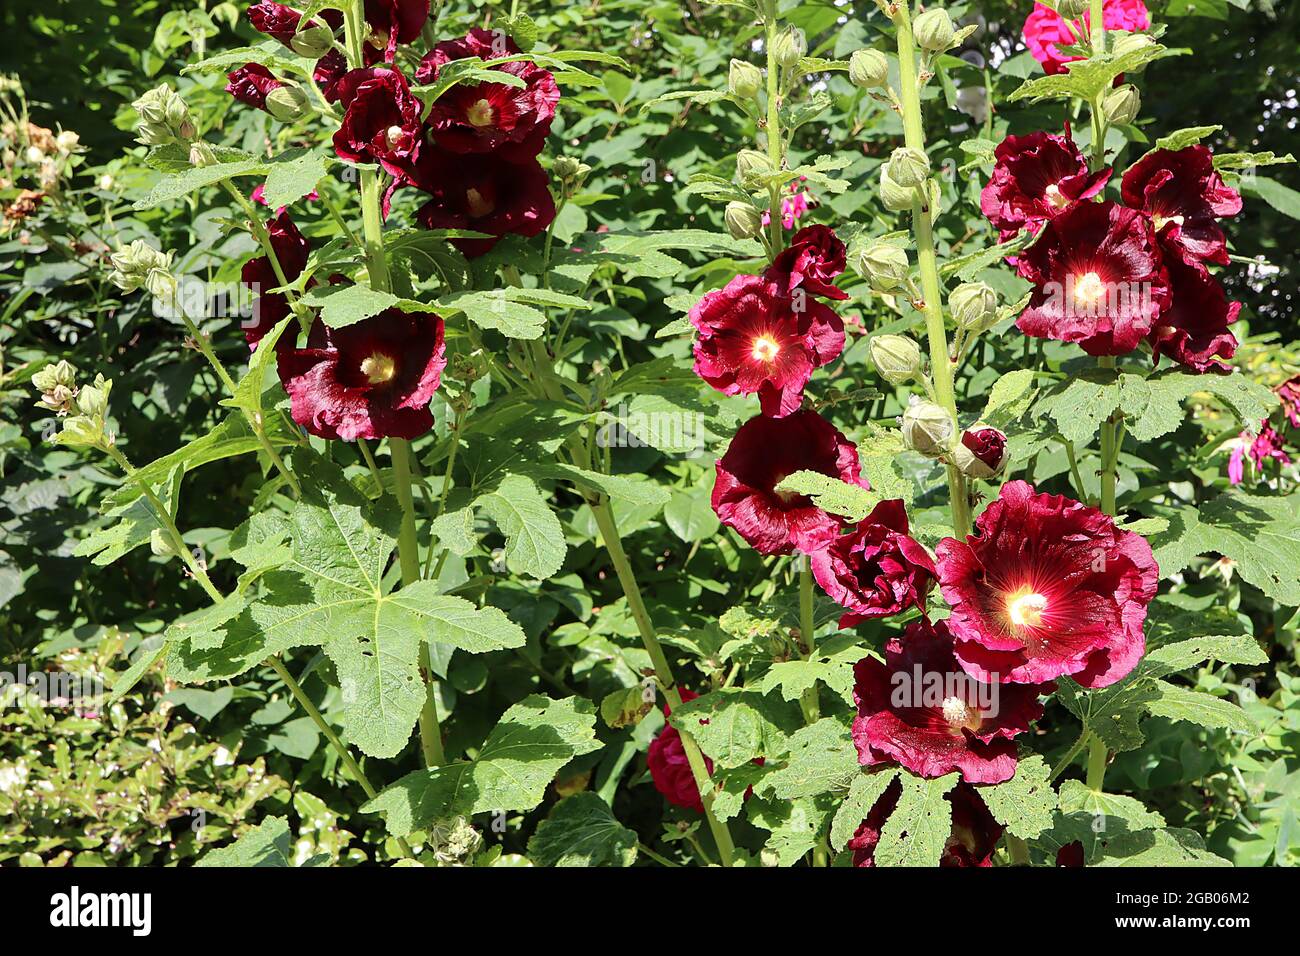 Alcea rosea subsp ficifolia ‘Creme de Cassis’ hollyhock Crème de Cassis – single deep red funnel-shaped flowers with maroon centre and lobed leaves Stock Photo